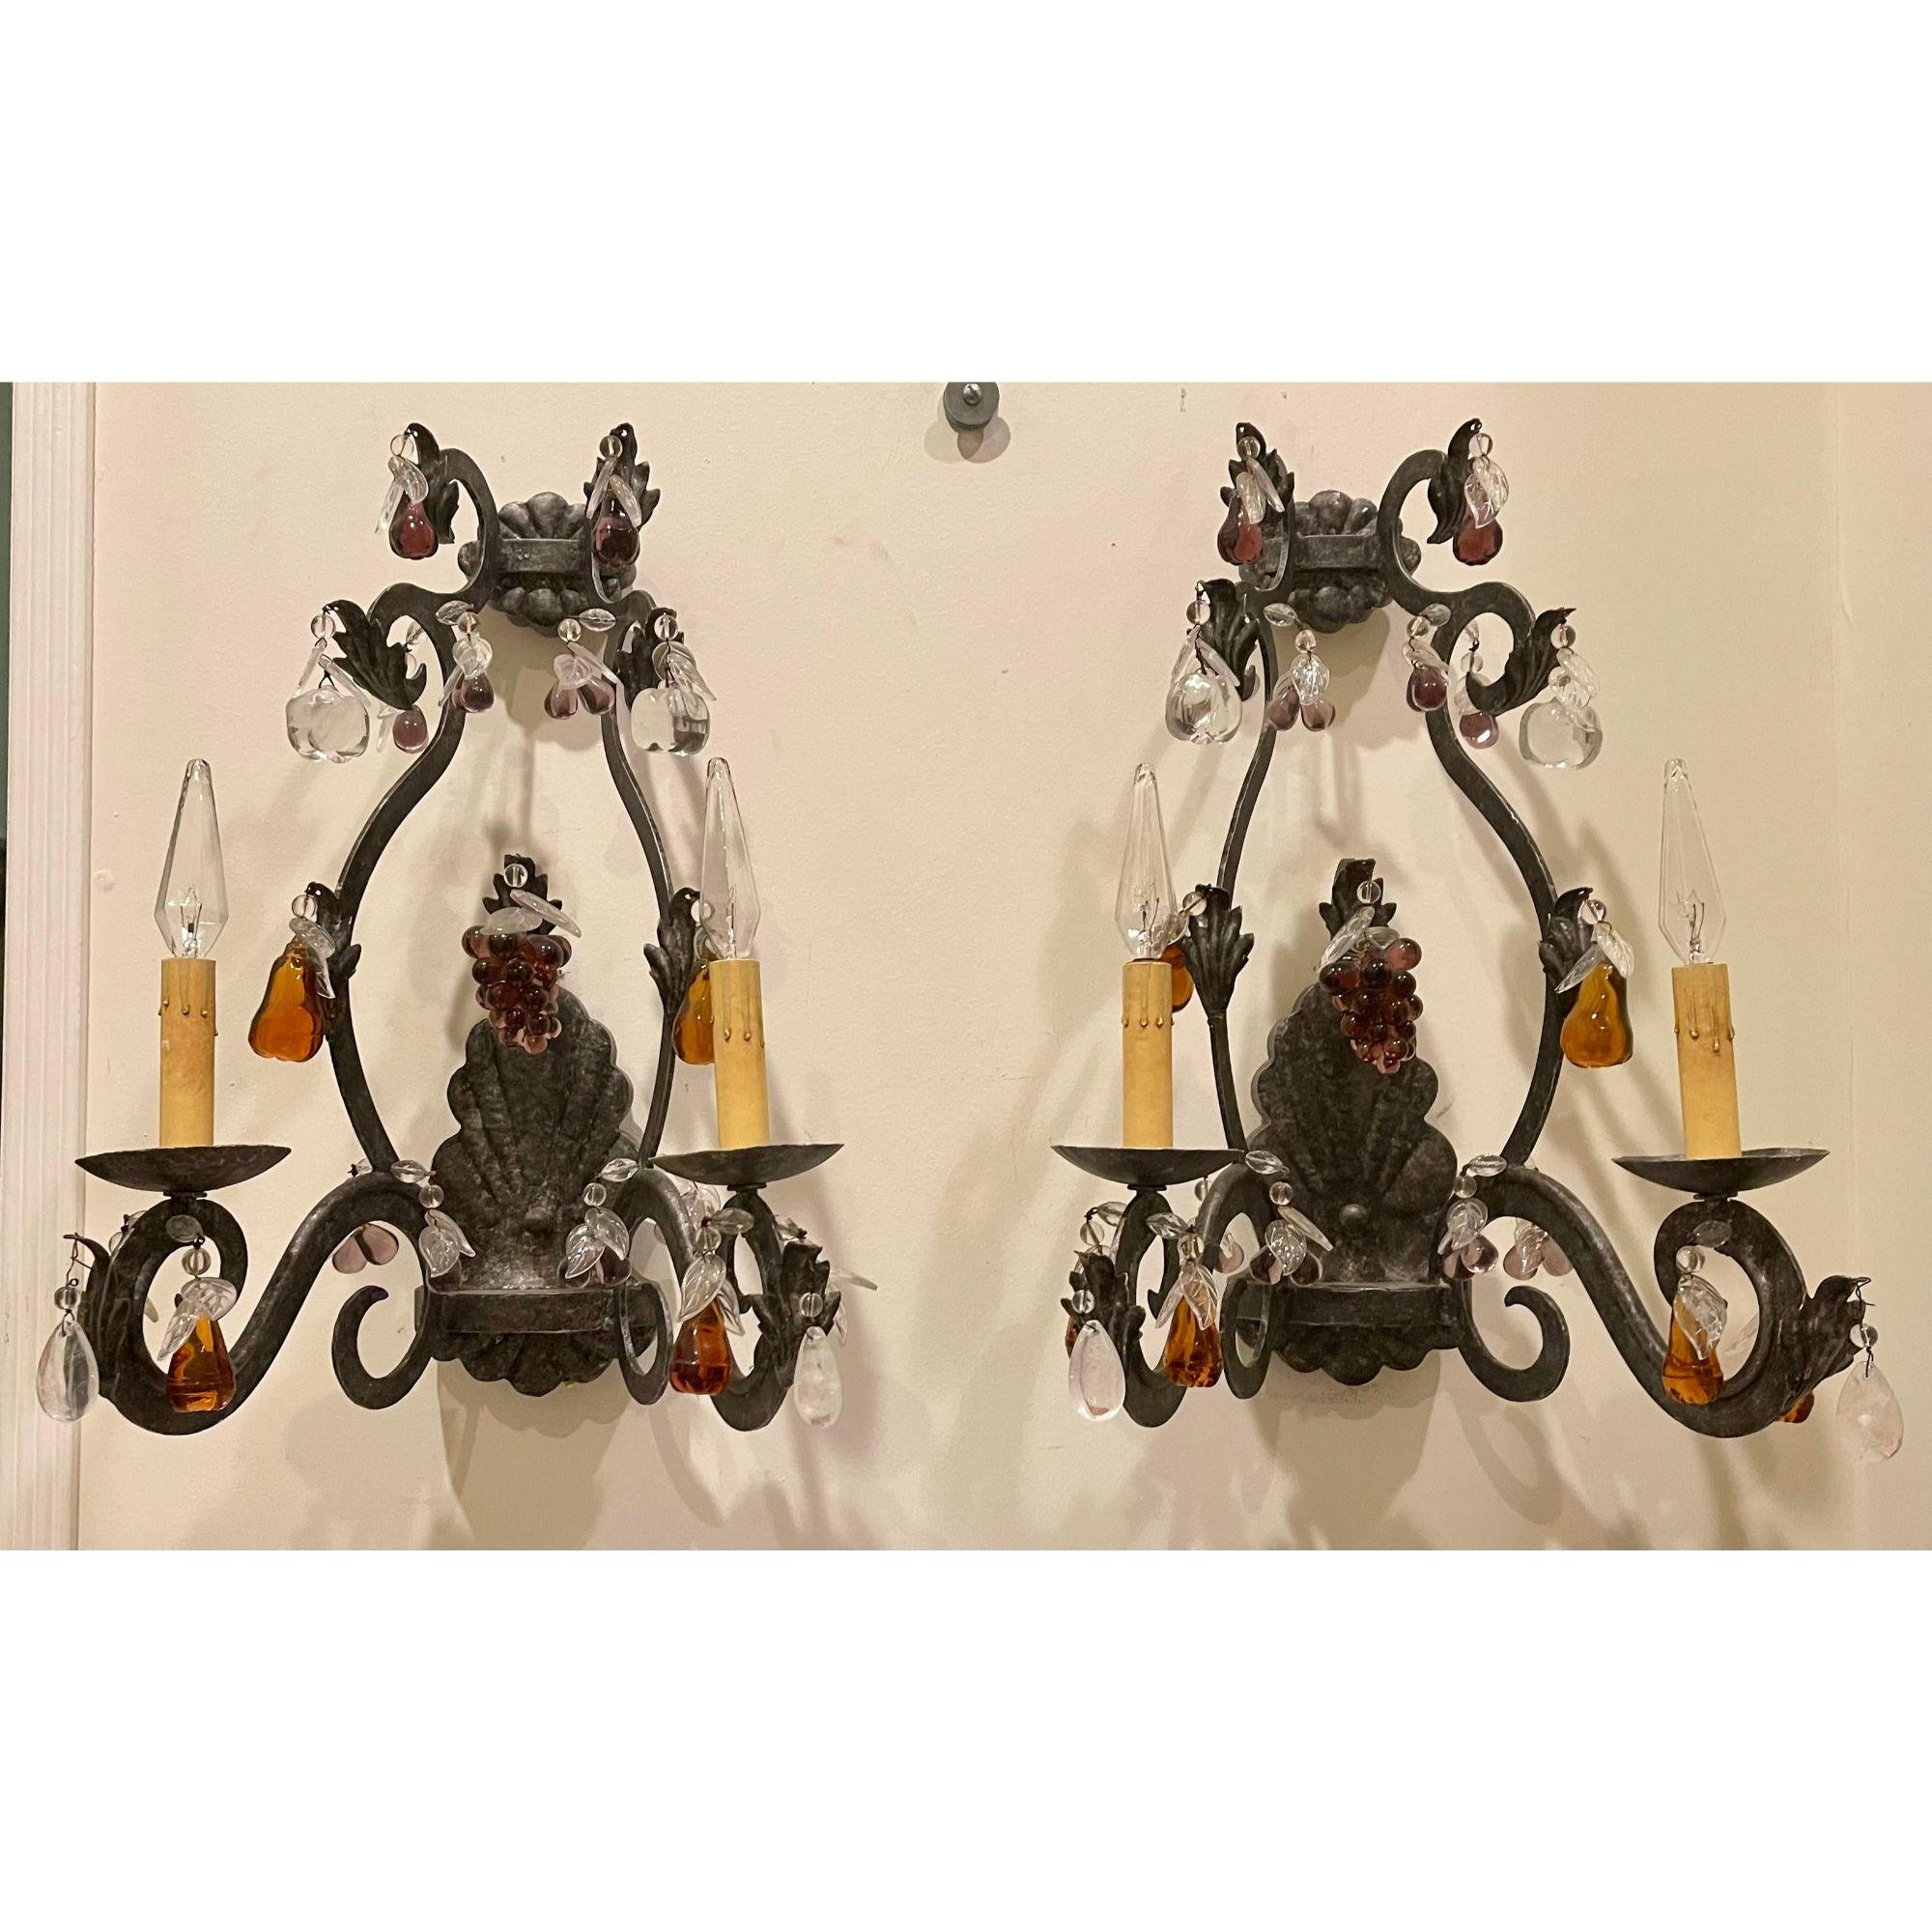 Murano Venetian glass & wrought iron wall light sconces - a pair

Additional information: 
Materials: Lights, Venetian Glass, Wrought Iron
Color: Amber
Period: 1990s
Styles: Italian
Item Type: Vintage, Antique or Pre-owned
Dimensions: 14